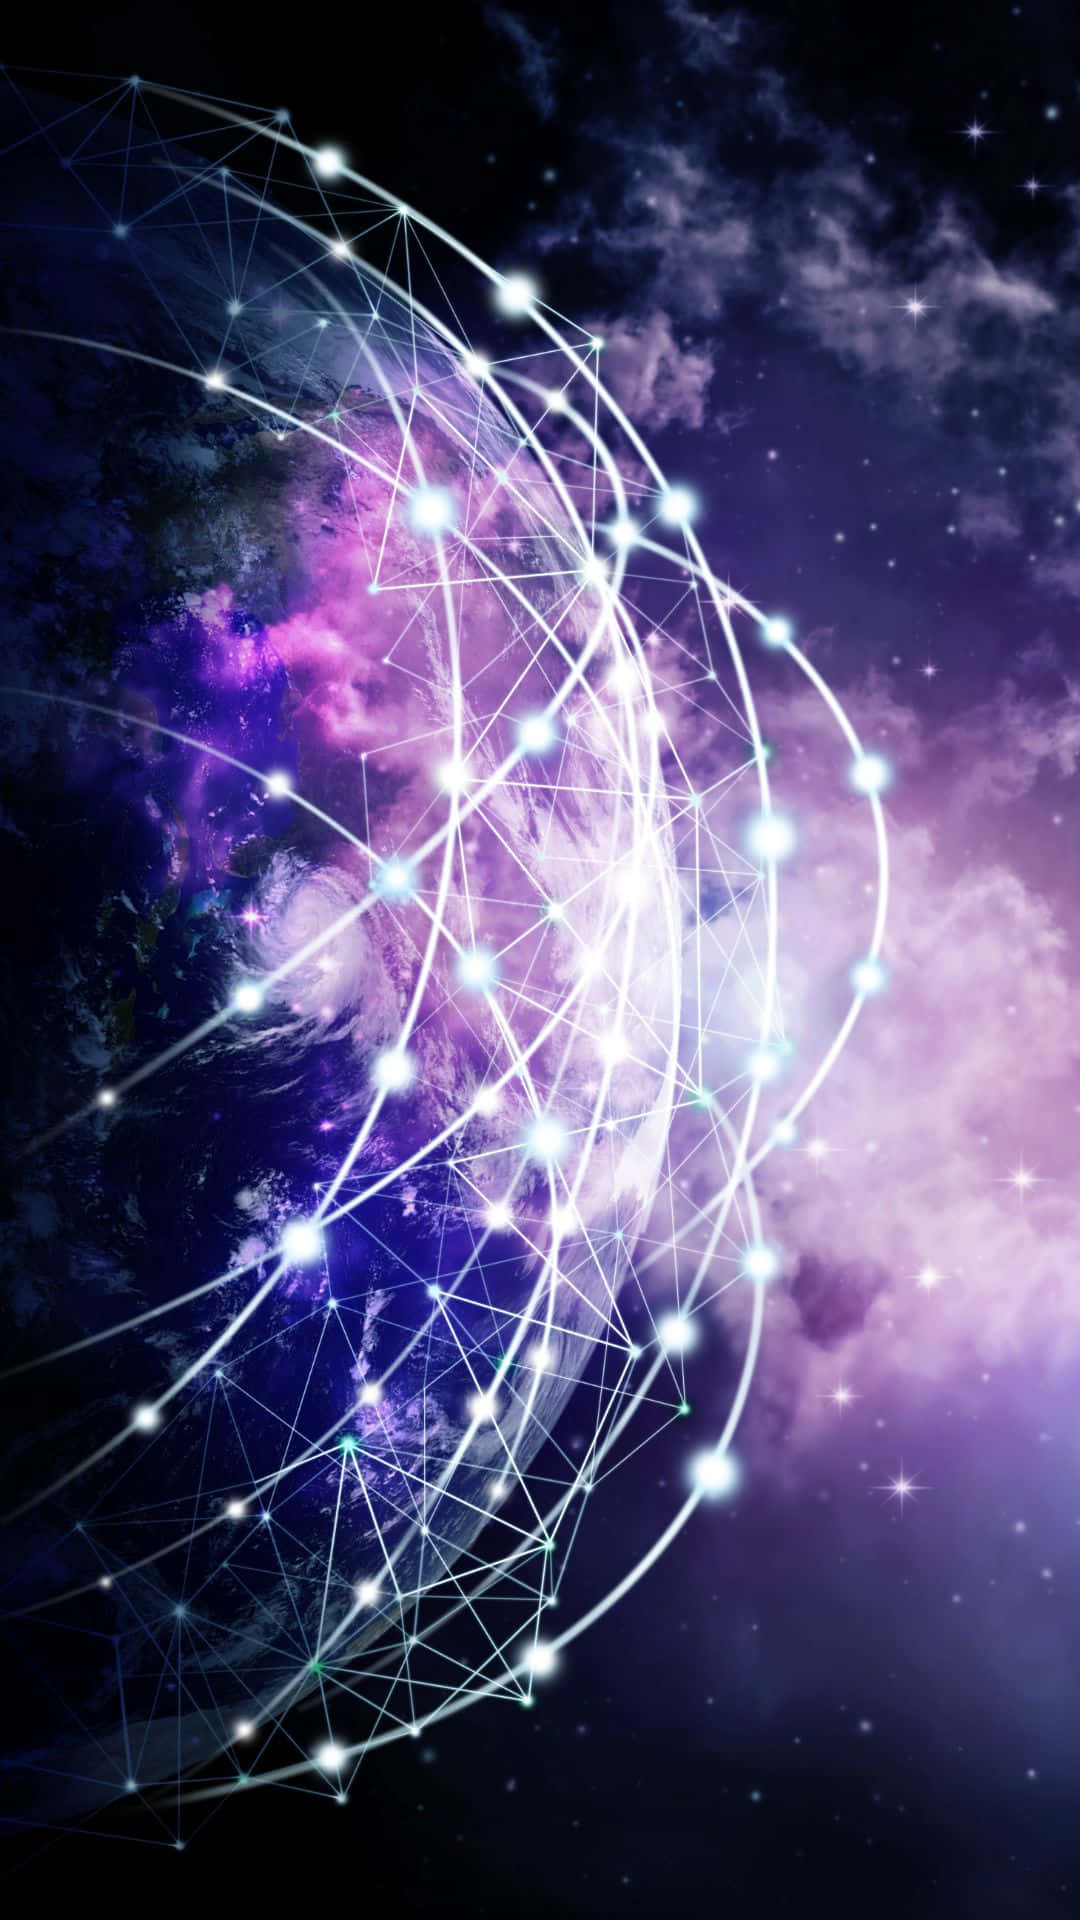 Digital Network Galaxy Abstract Background